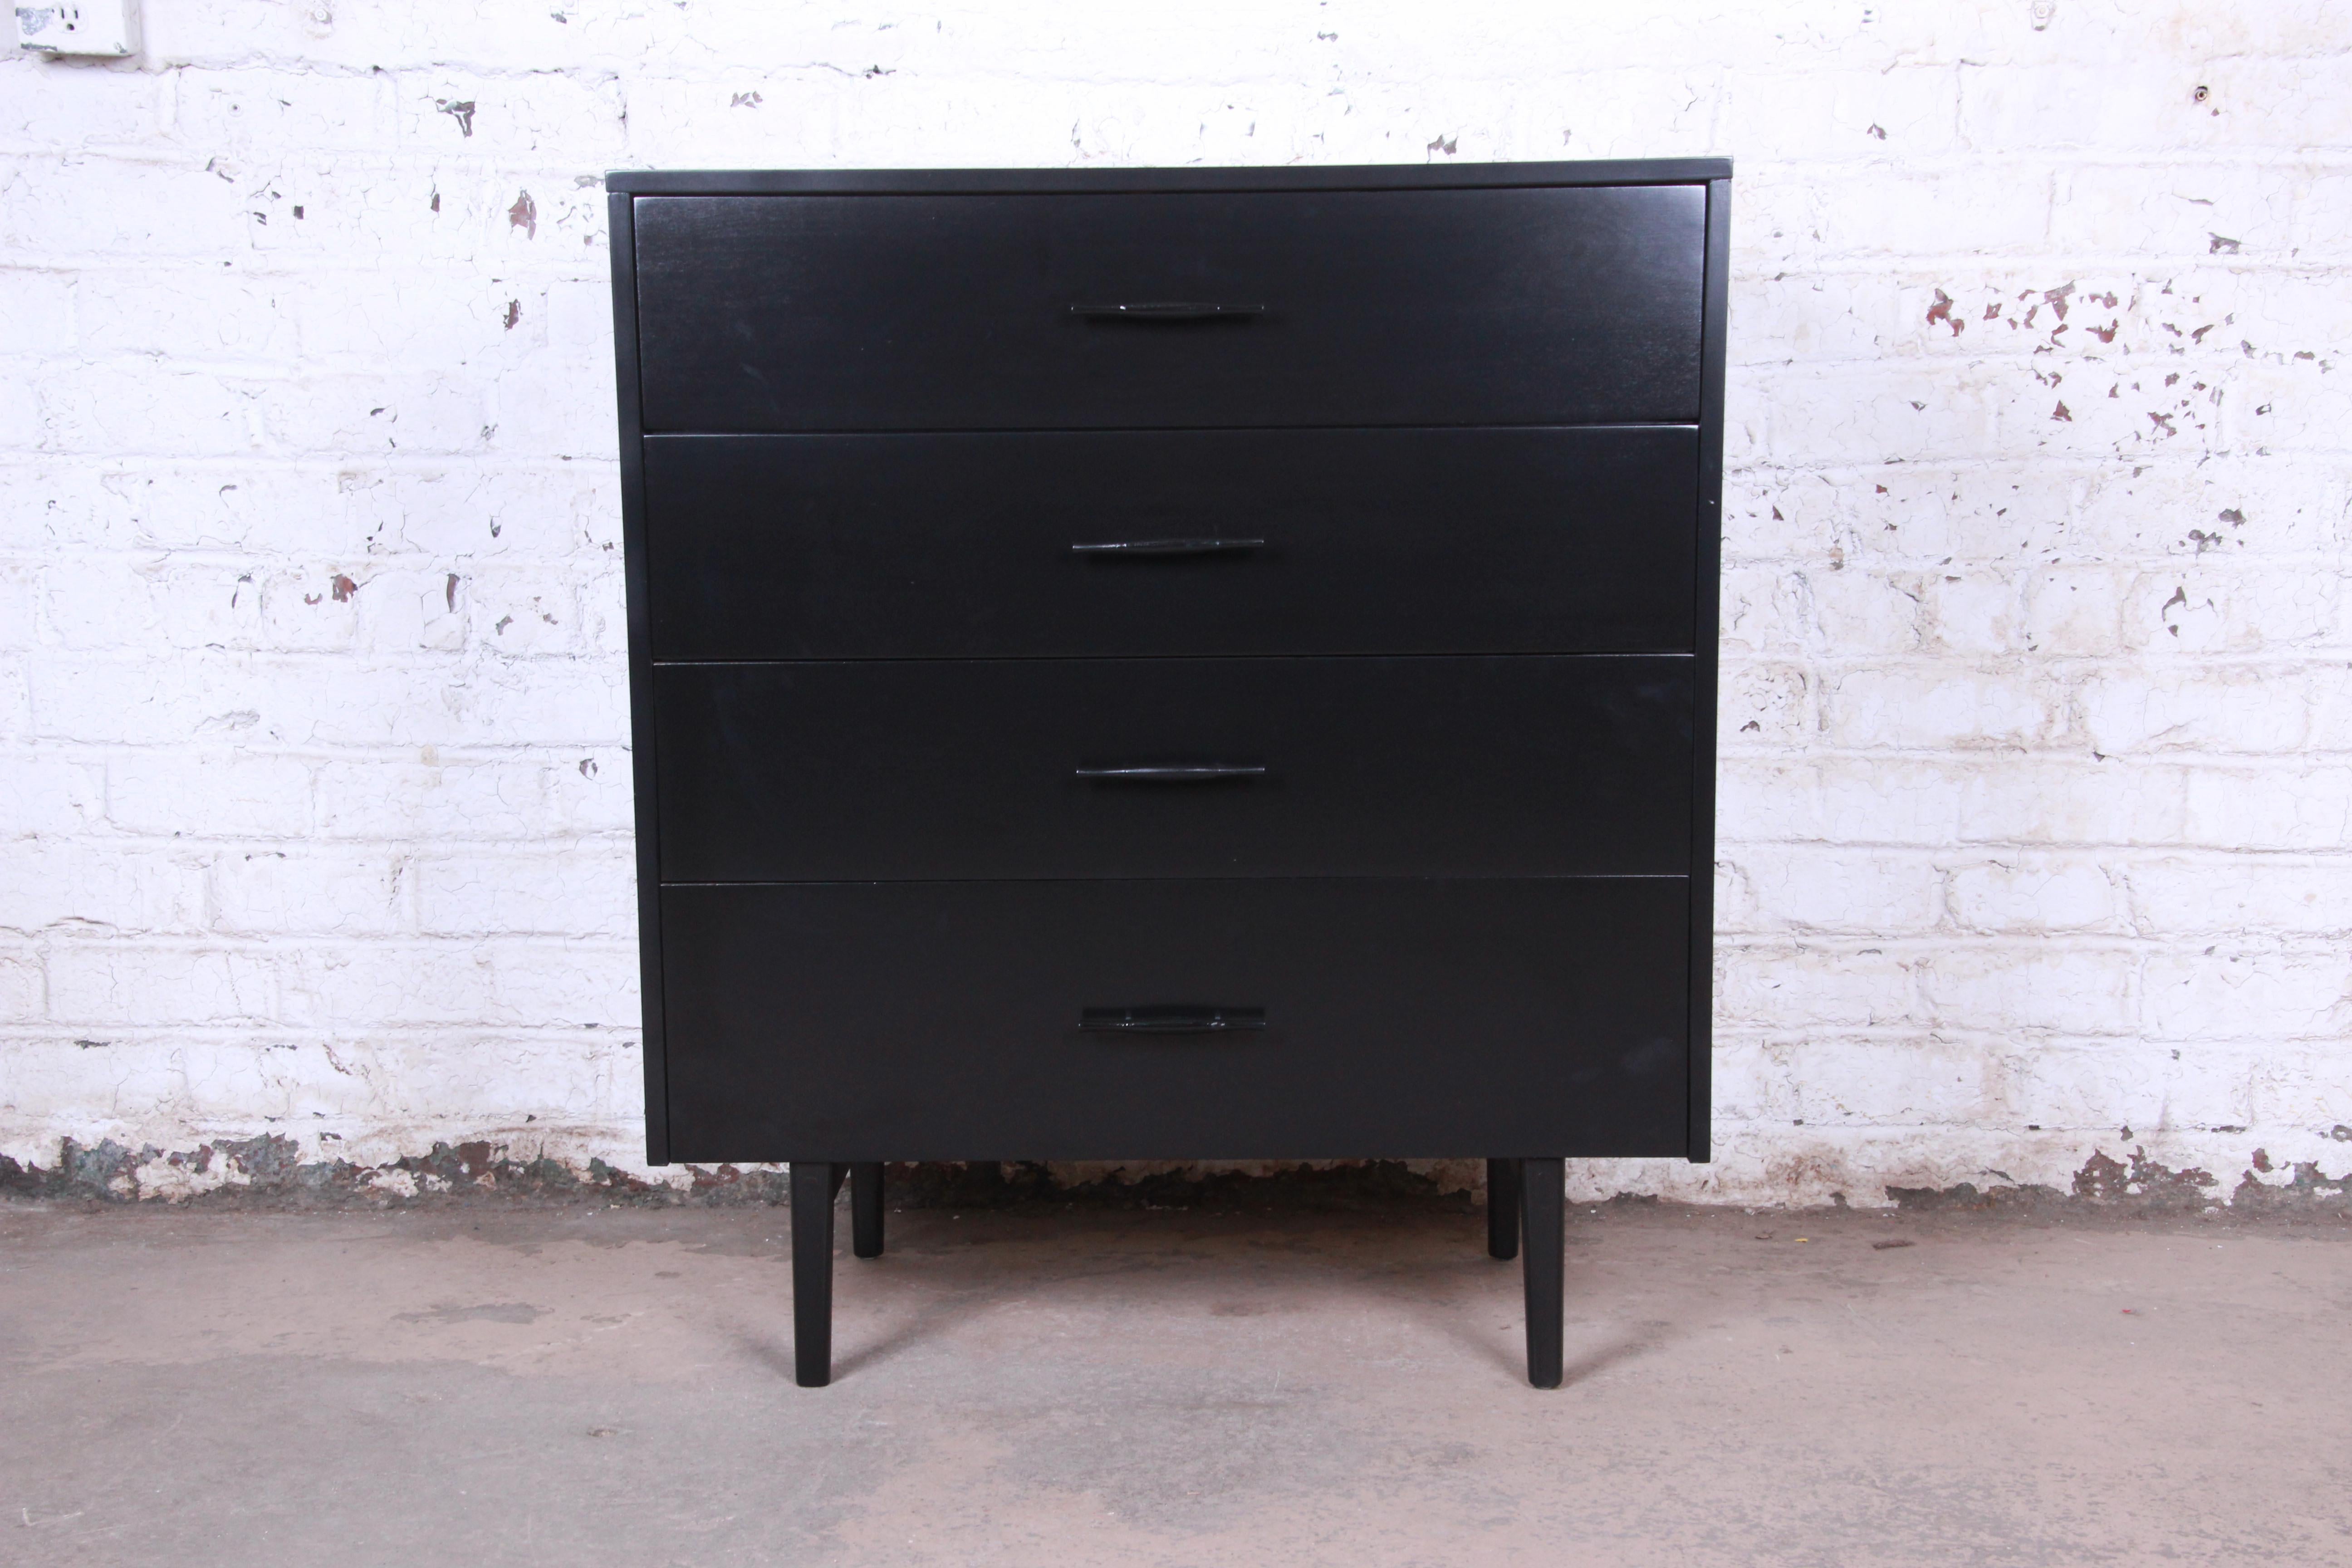 An exceptional Mid-Century Modern highboy dresser designed by Paul McCobb for his Planner Group line for Winchendon Furniture. The dresser features solid maple construction and McCobb's iconic sleek, Minimalist mid-century design. It offers good